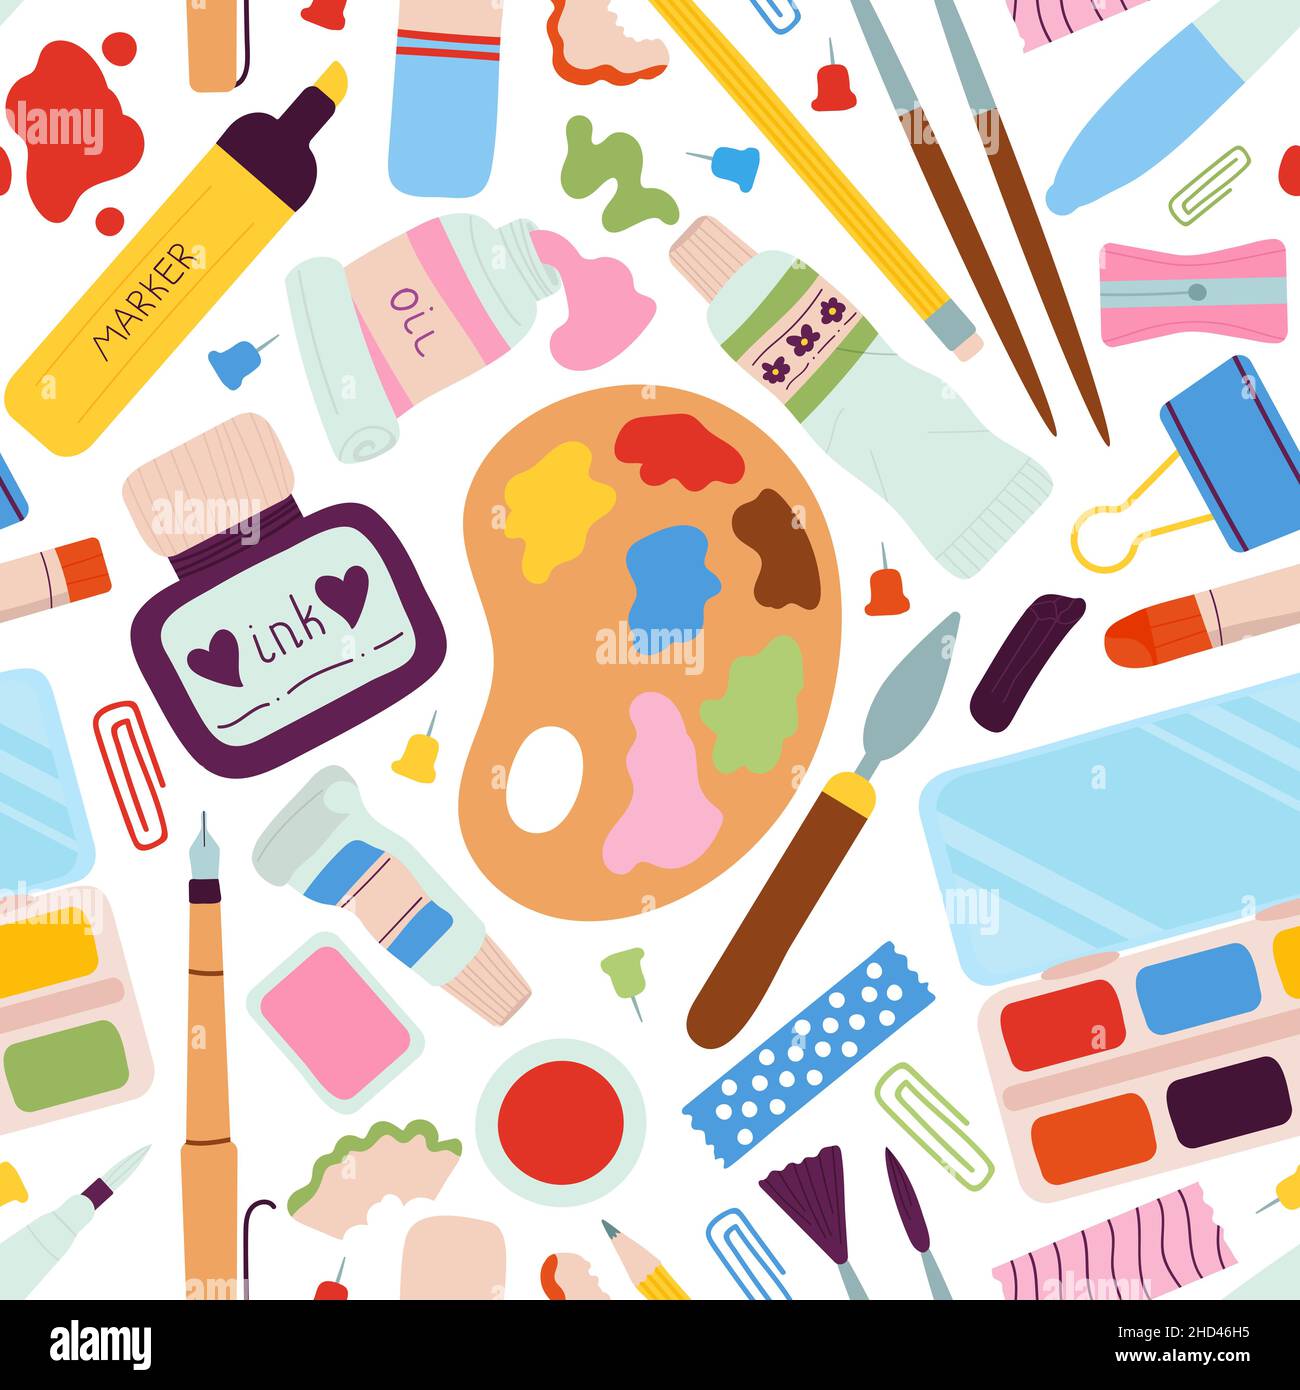 Drawing tools seamless pattern. Pen and watercolor, palette and